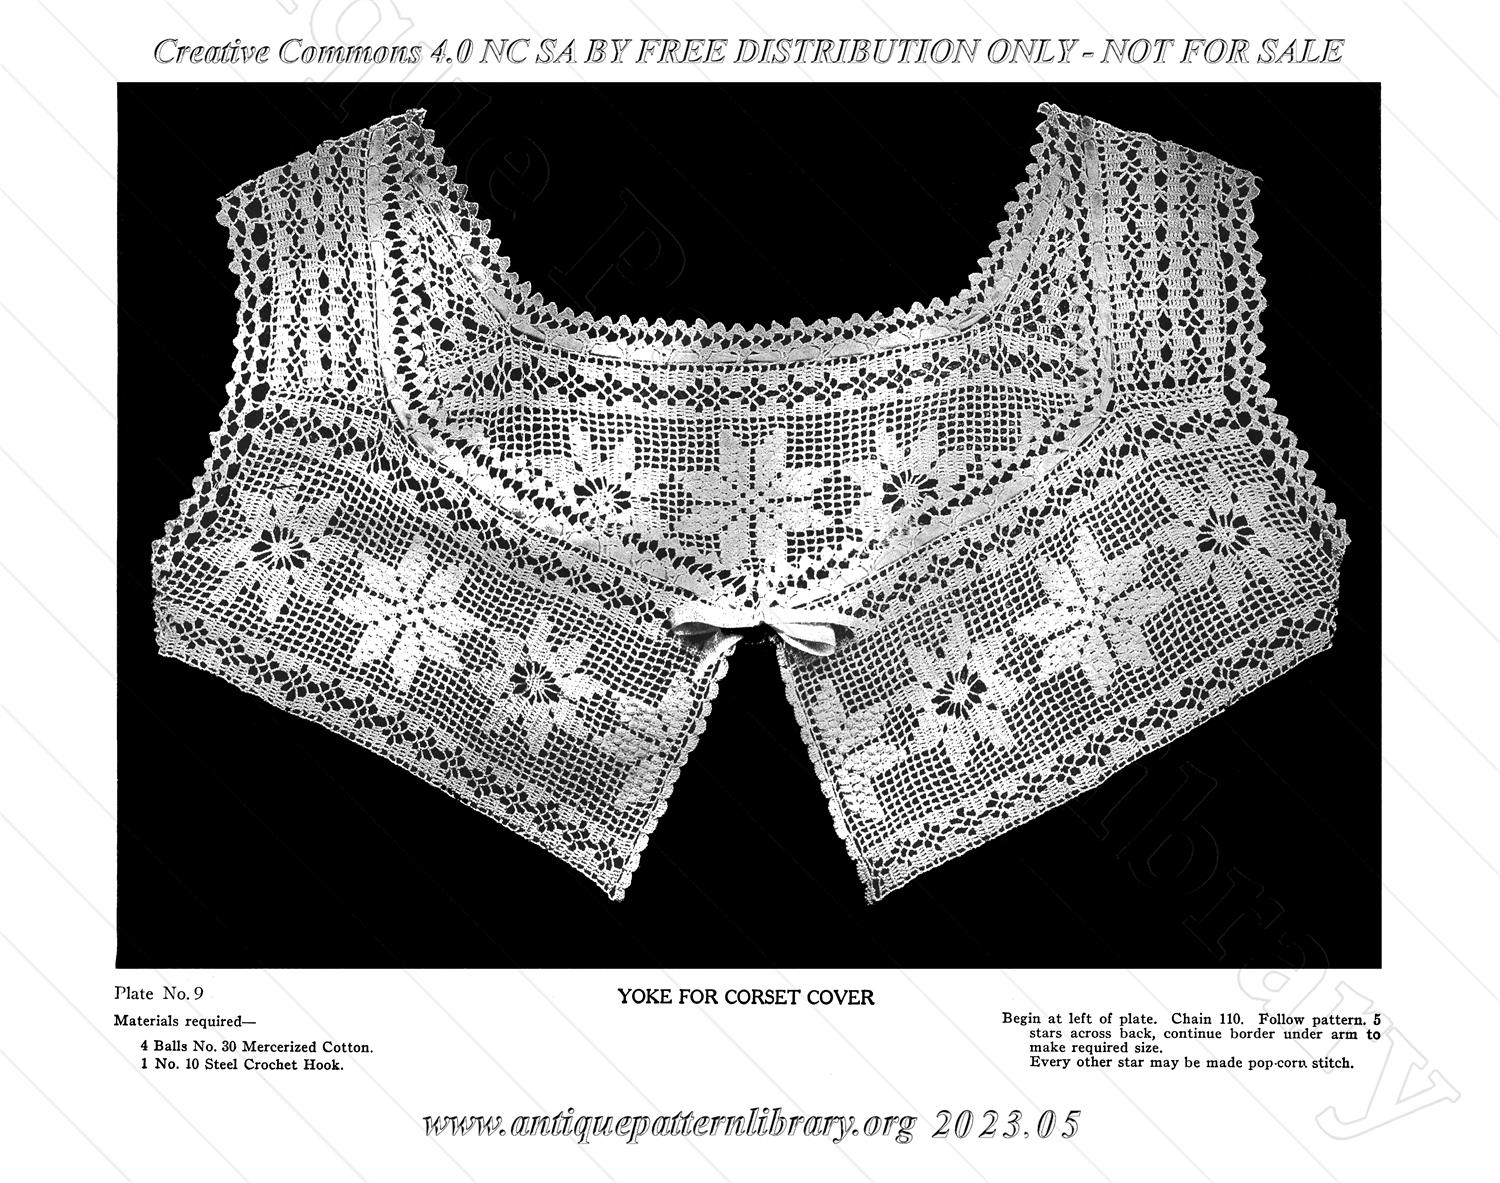 N-AP001 Crocheted Yokes for Corset Covers and Night Gowns